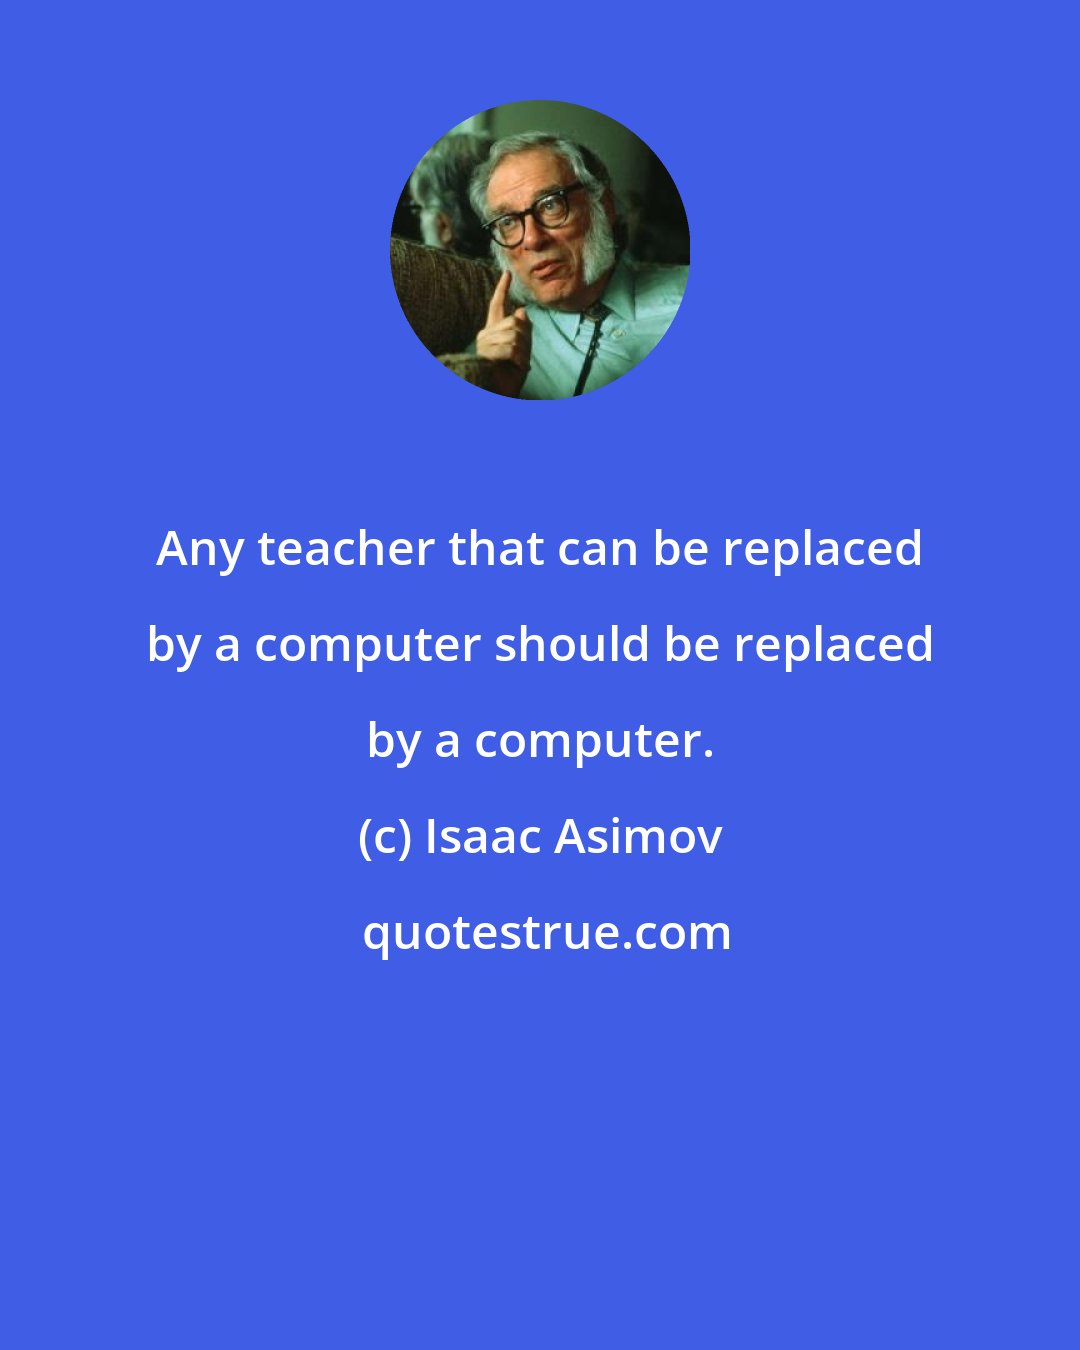 Isaac Asimov: Any teacher that can be replaced by a computer should be replaced by a computer.